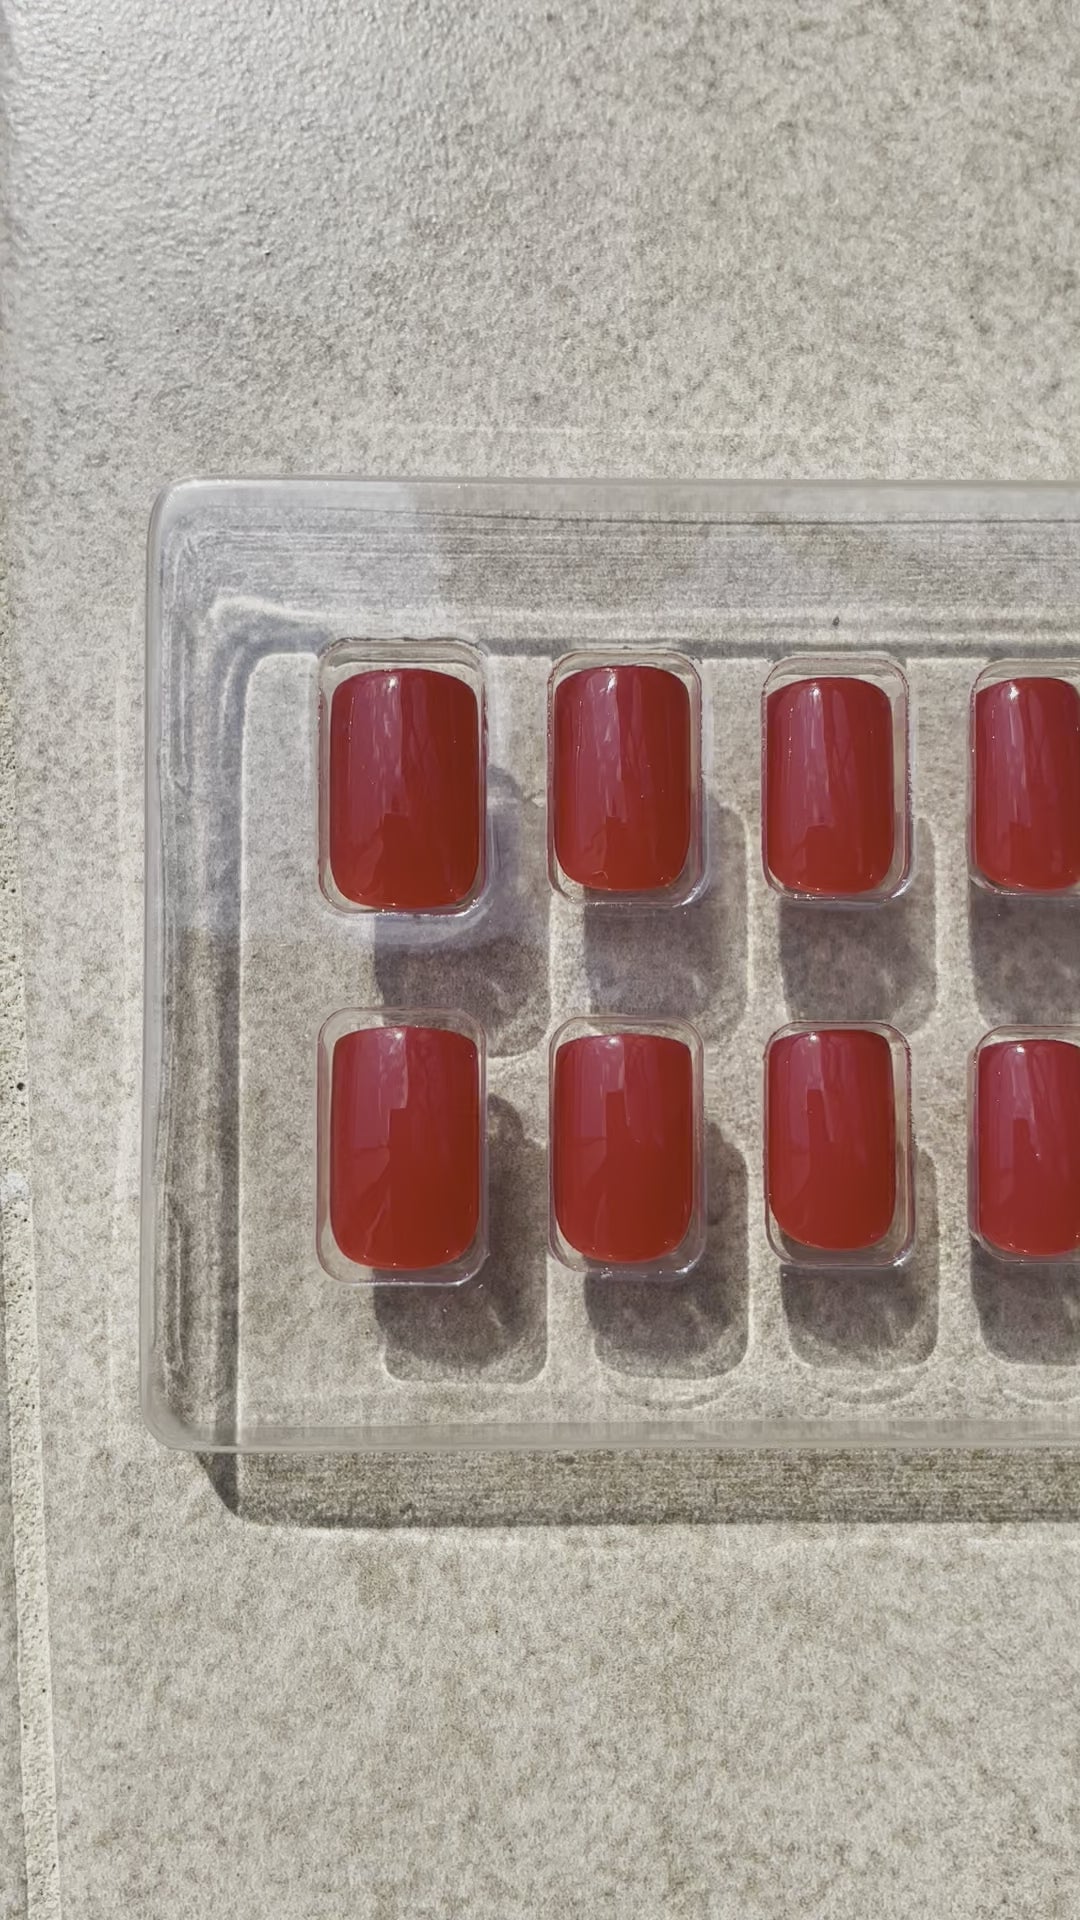 Reusable Short Red Square Press-on Nails in vibrant red. Nails are called Ruby Square and are made by Leewa Beauty 